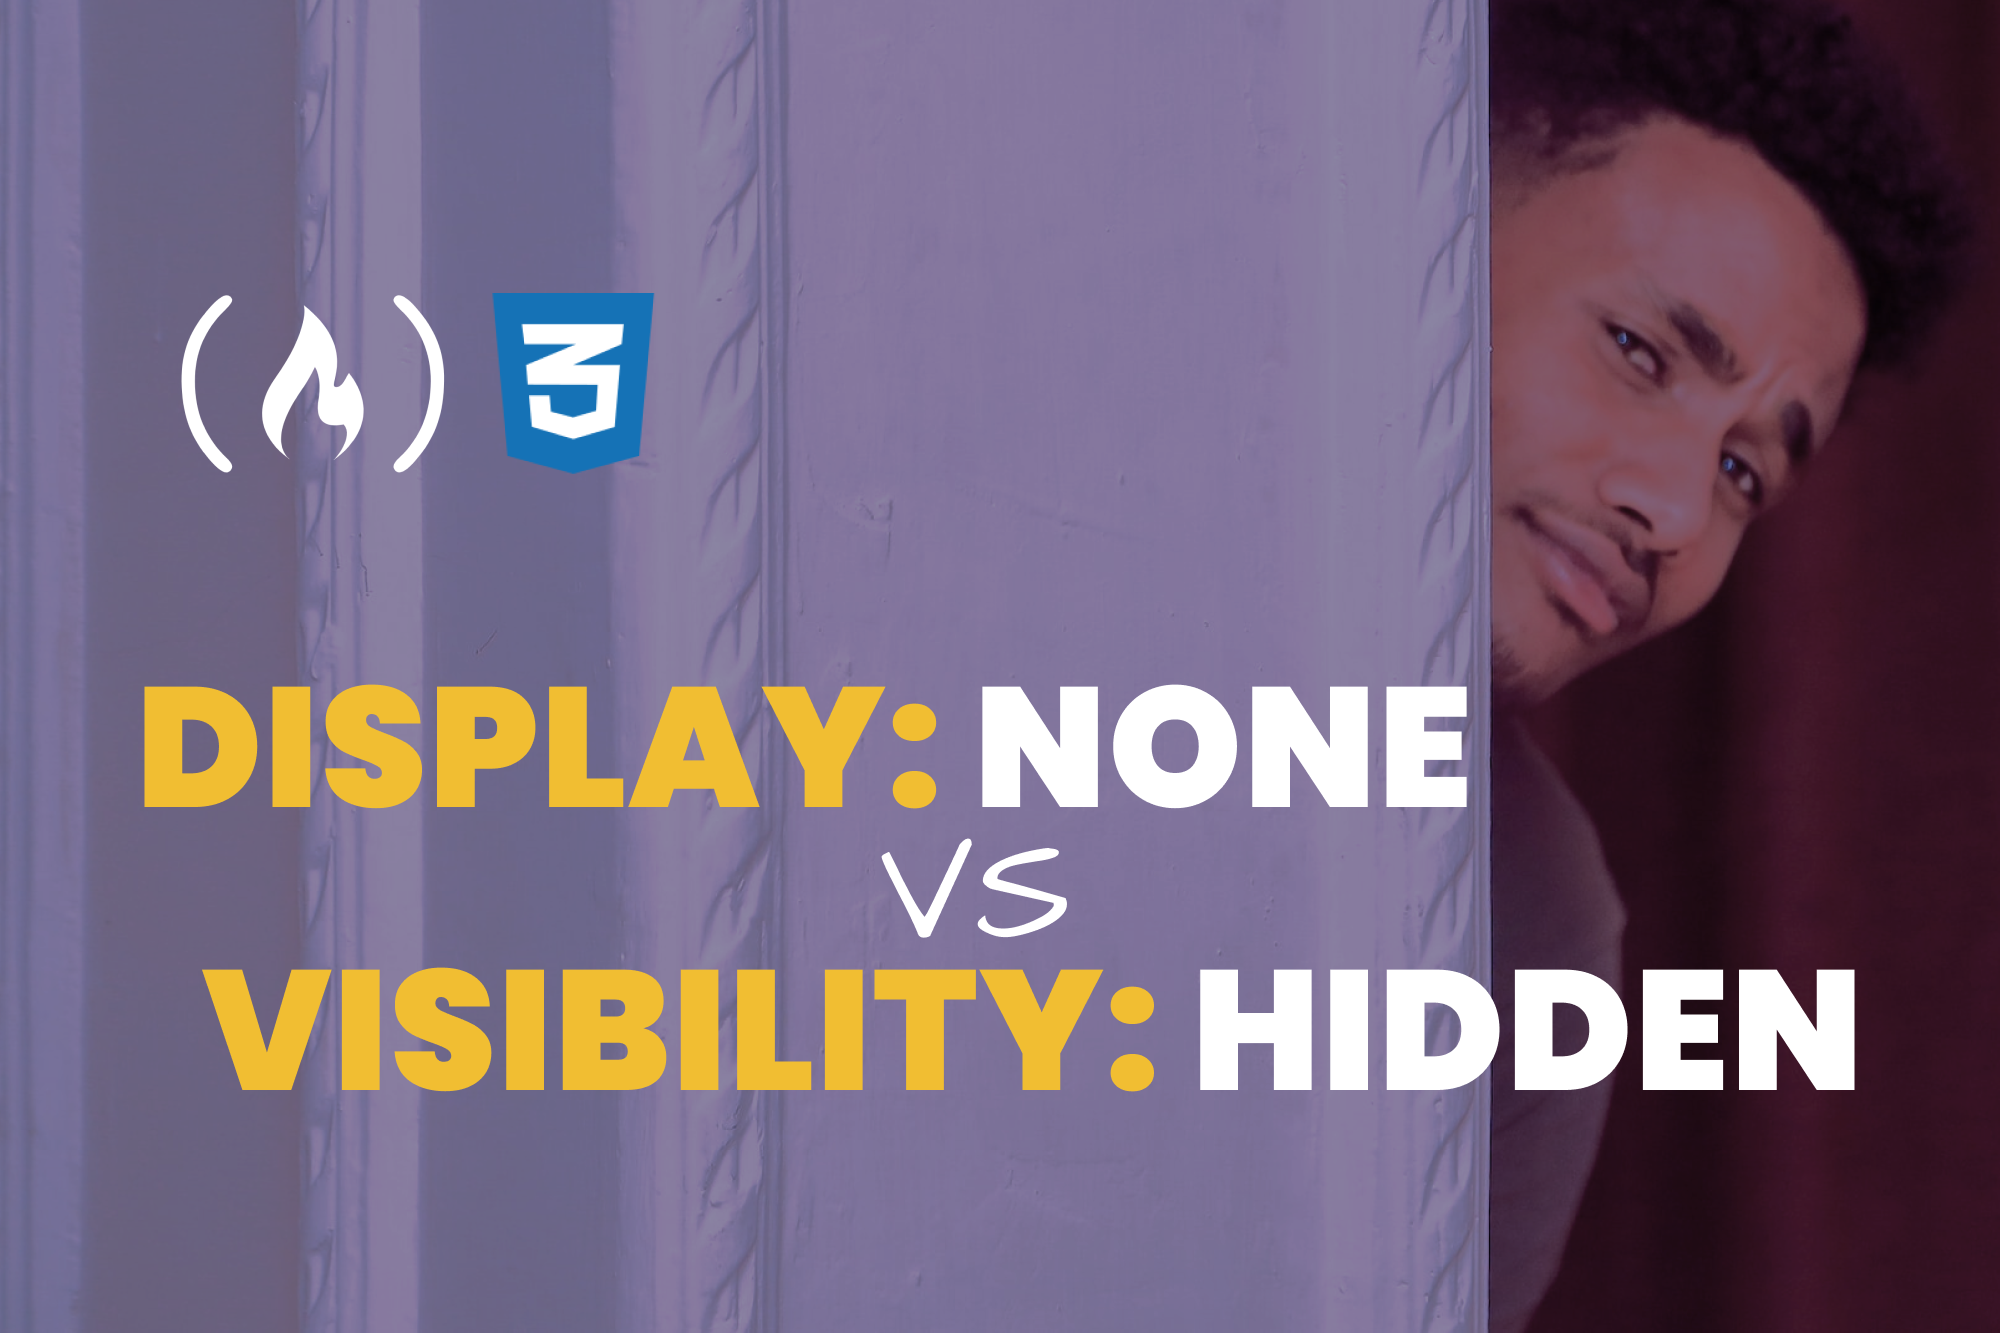 CSS display:none 和 visibility:hidden 的区别